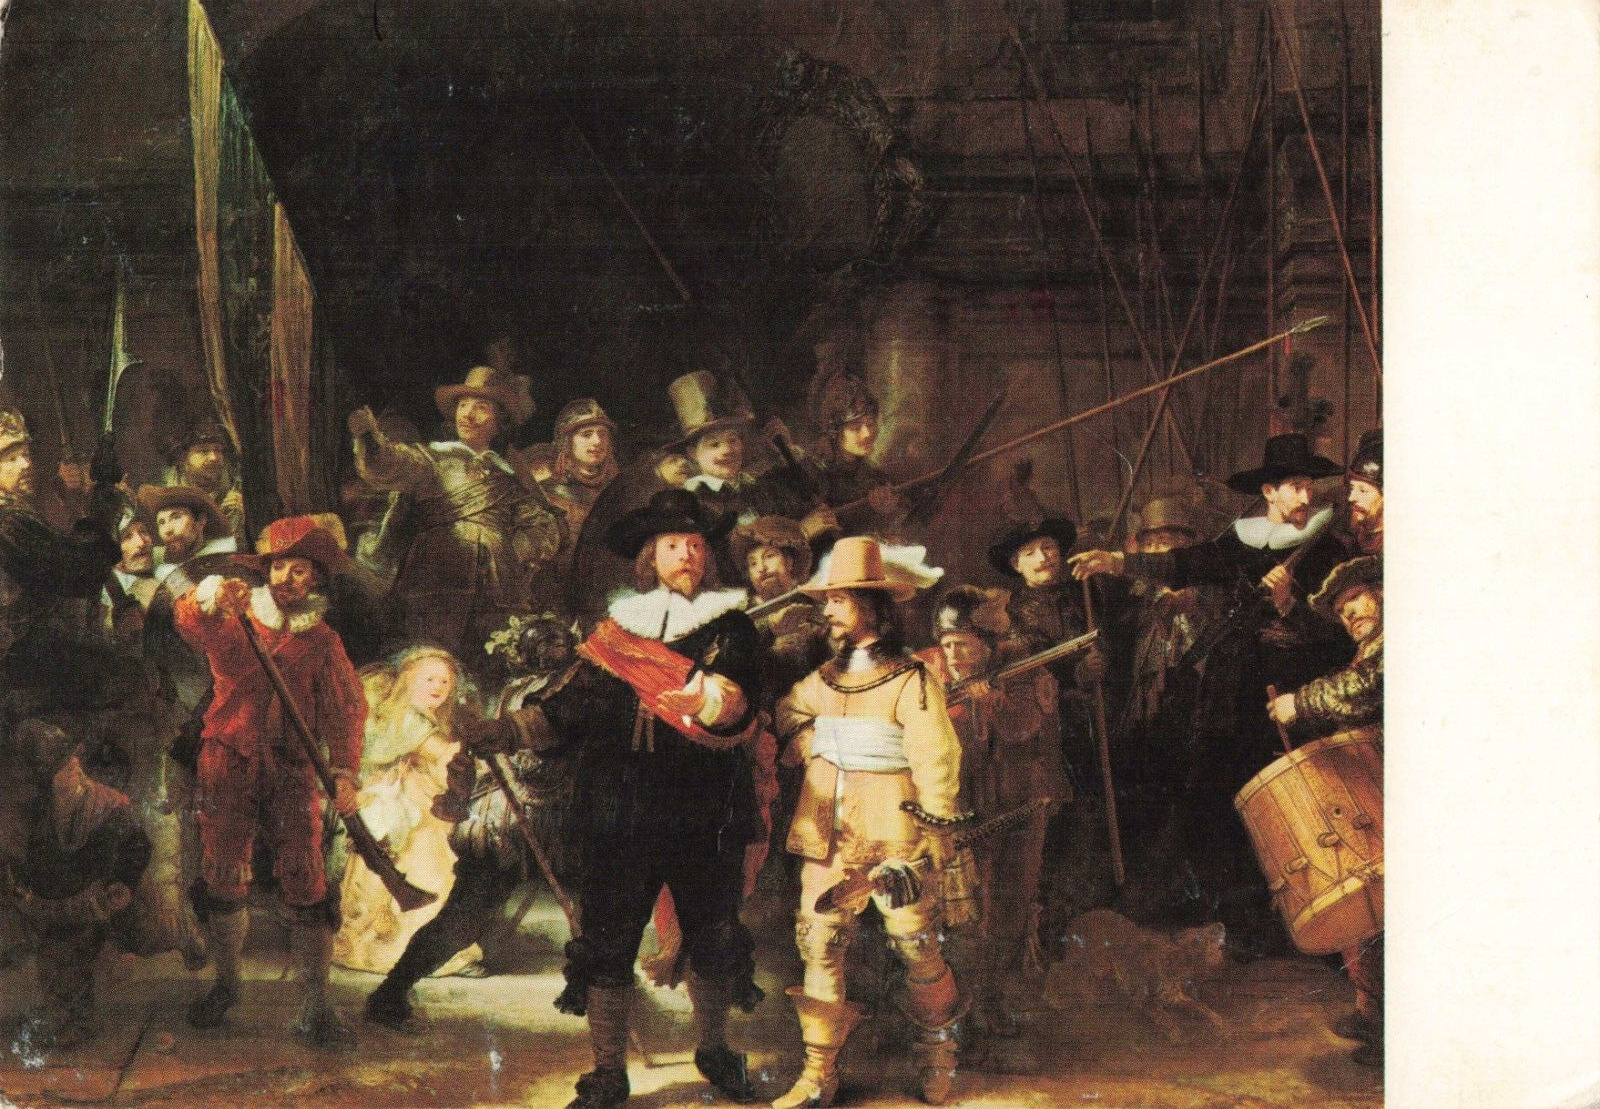 Amsterdam Netherlands, The Nightwatch Painting, Rembrandt, Vintage Postcard